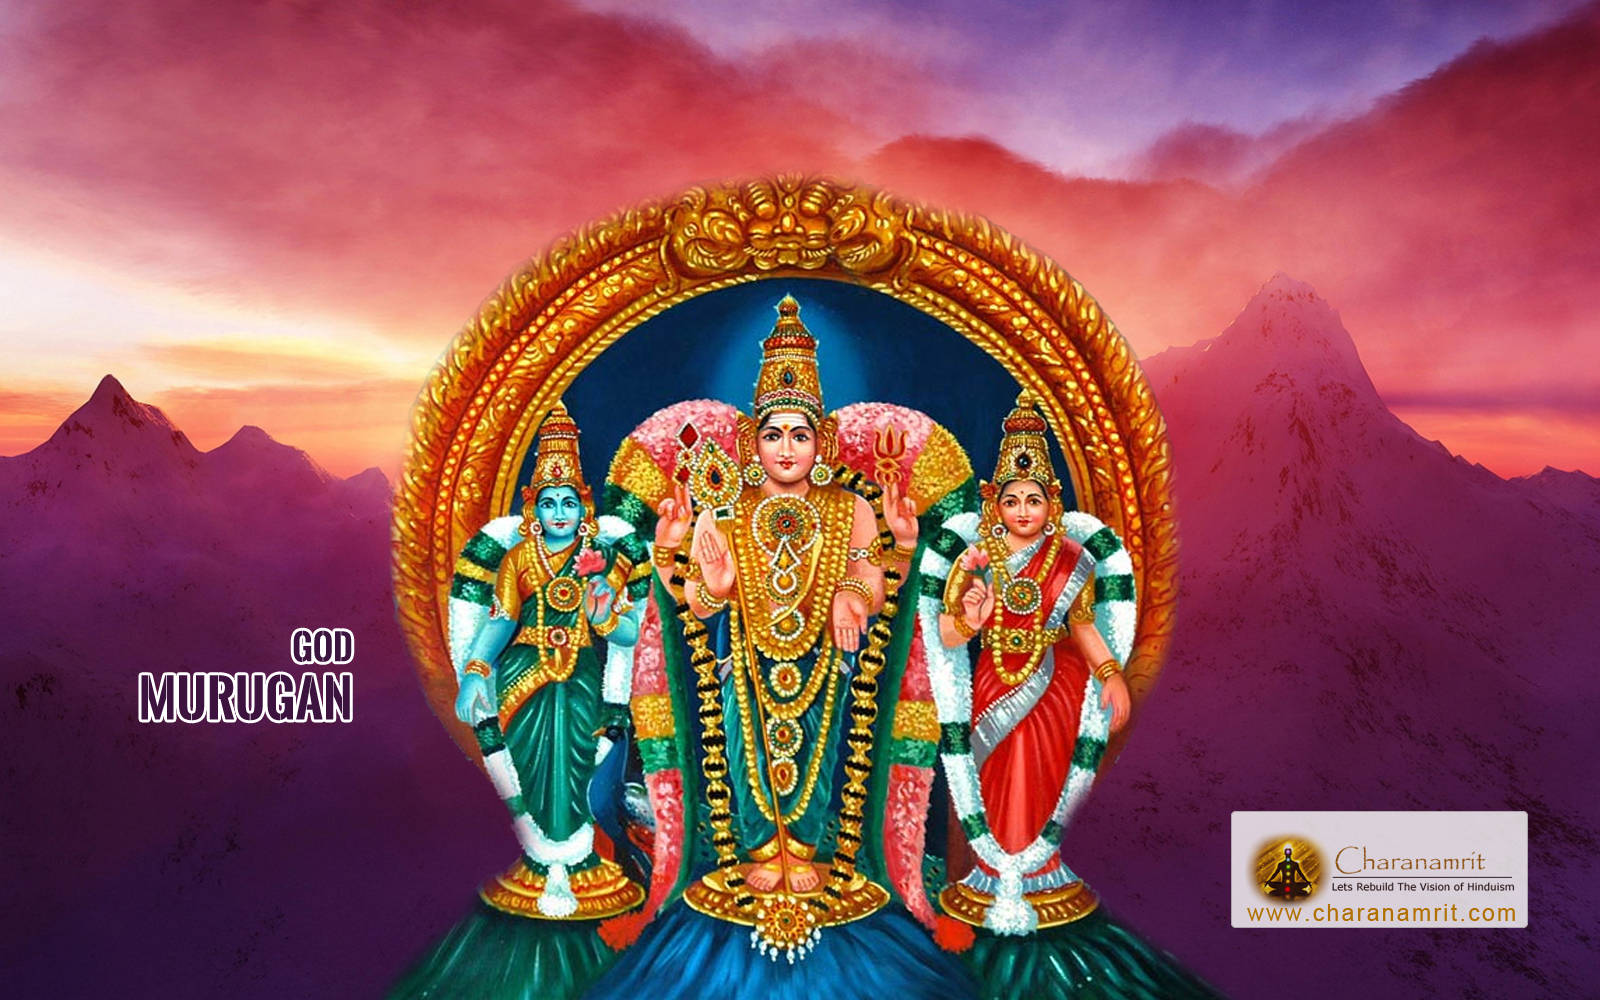 Lord Murugan With His Two Wives